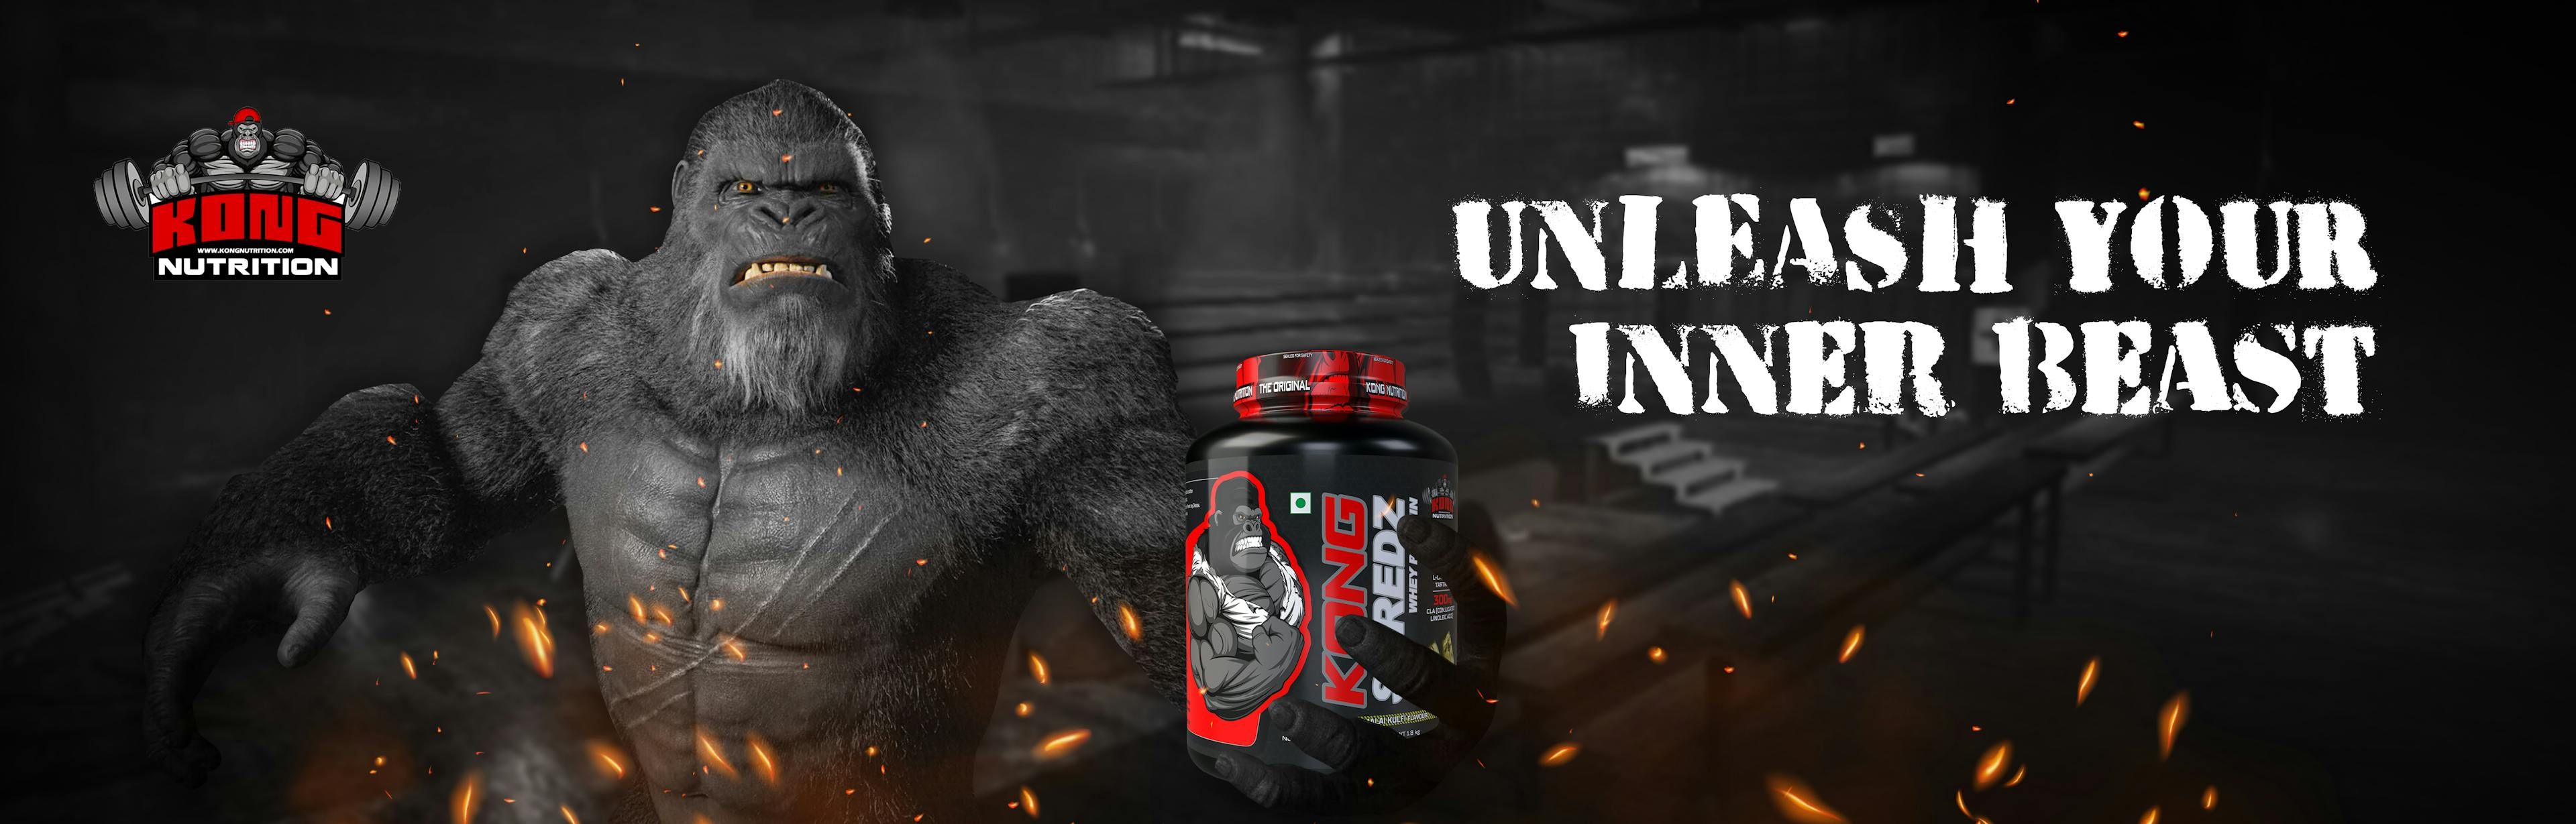 Kong Nutrition